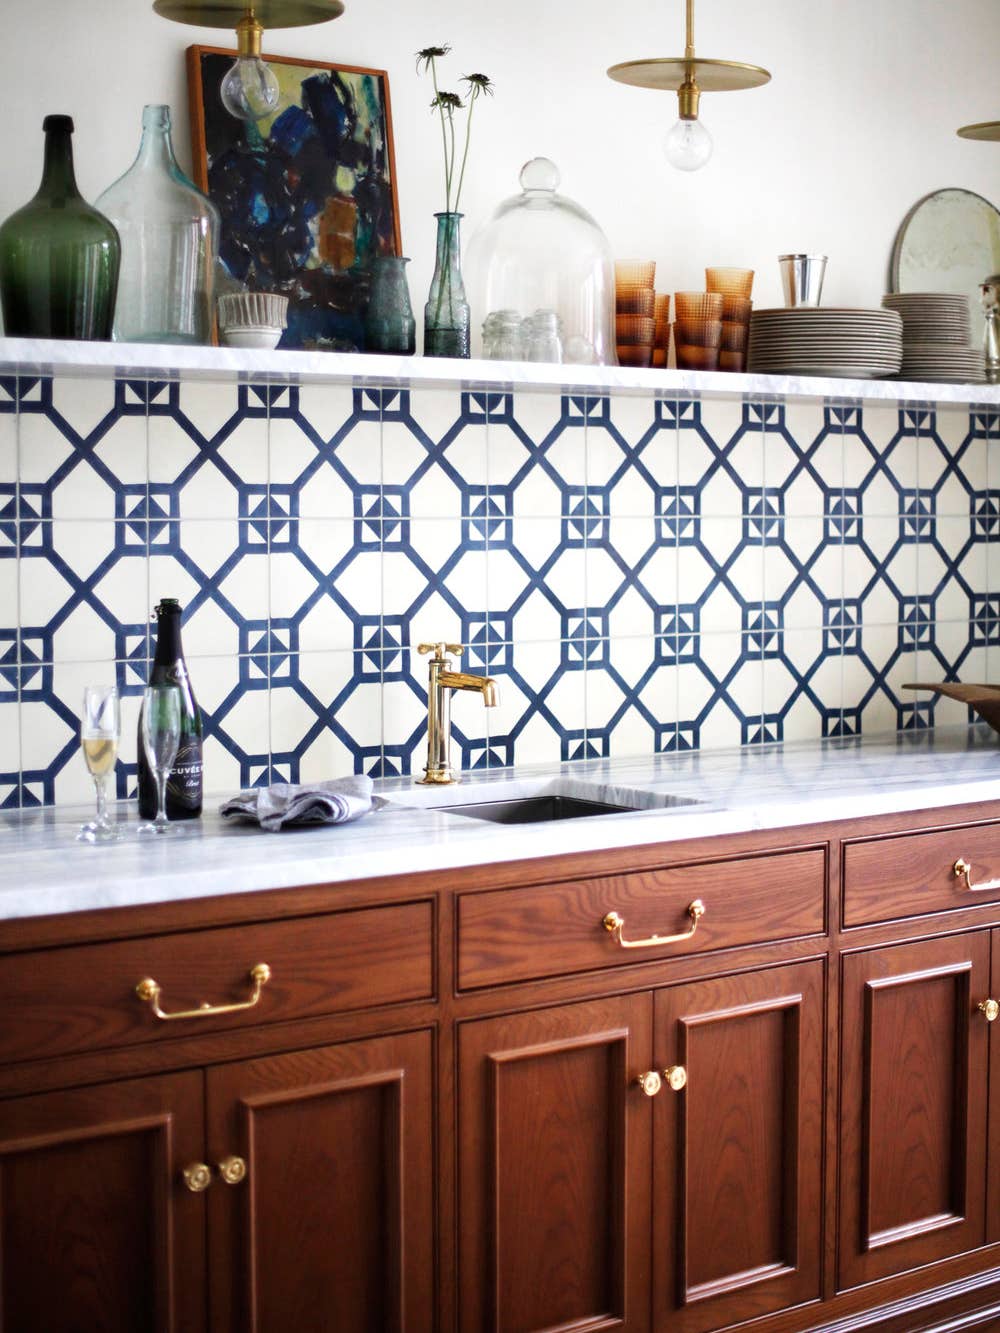 6 Easy Kitchen Upgrades That Don’t Require Ripping Out Your Cabinets